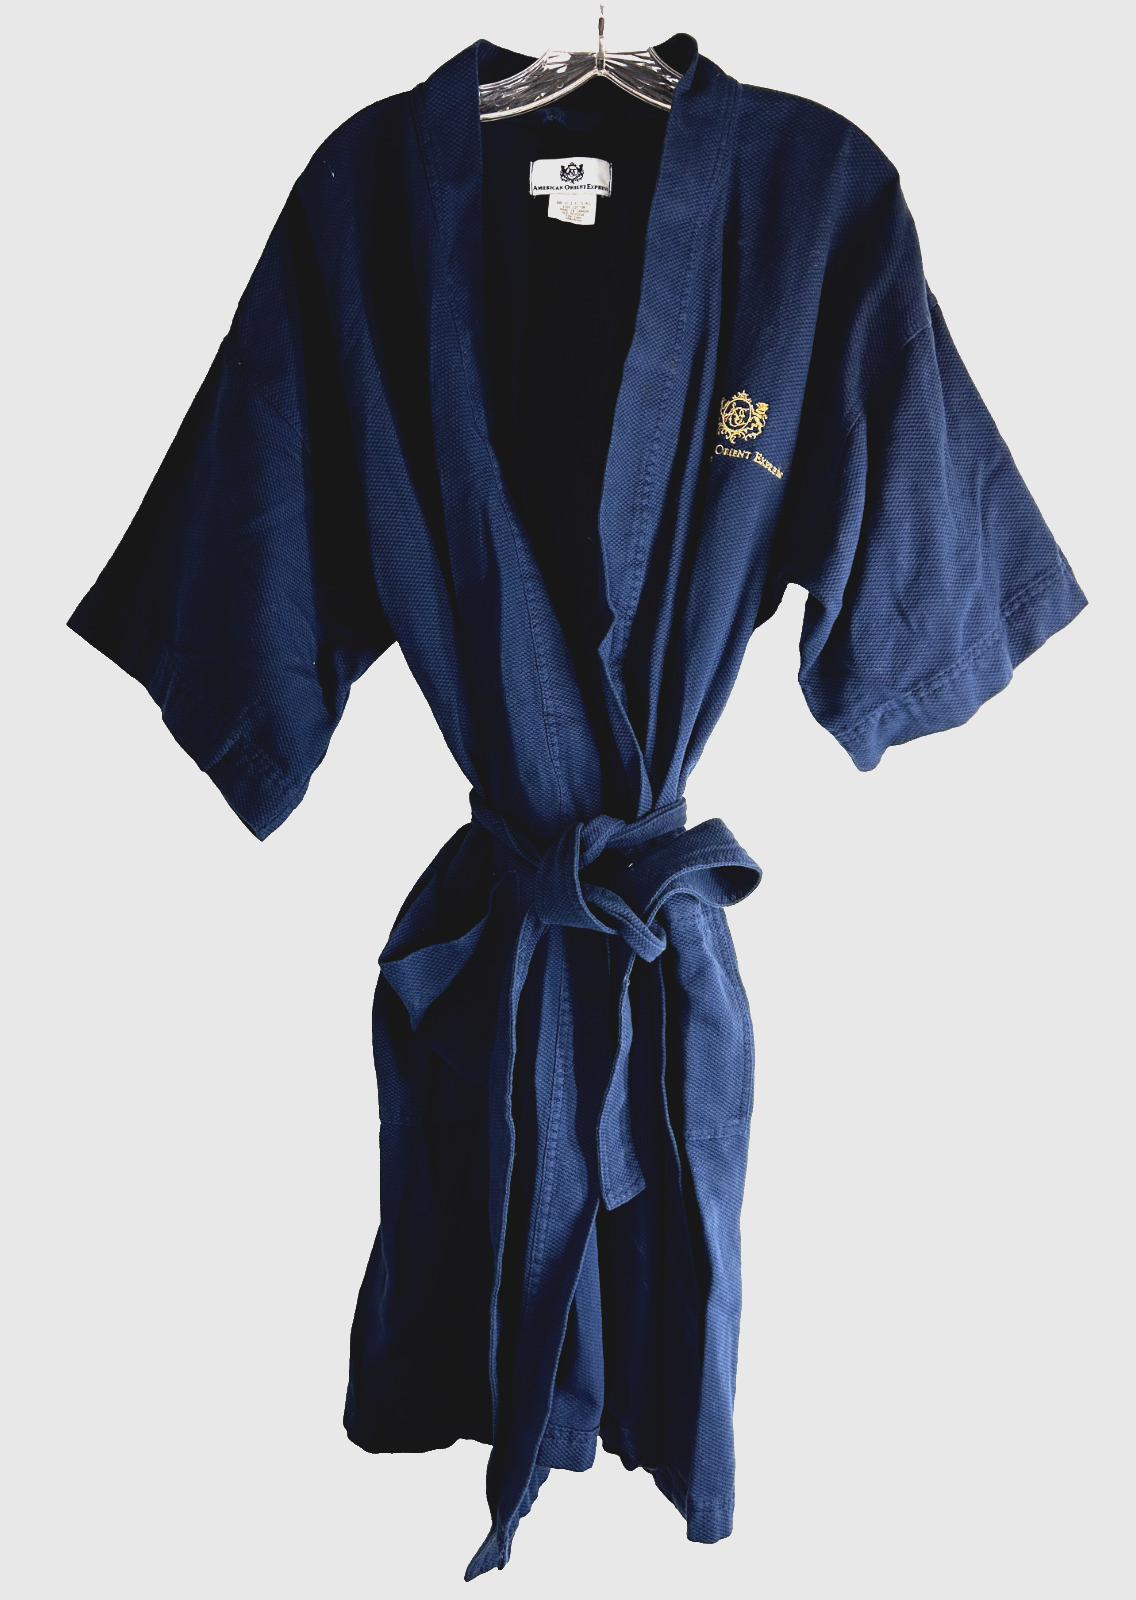 American Orient Express Train robe one size navy gold Embroidered waffle crest